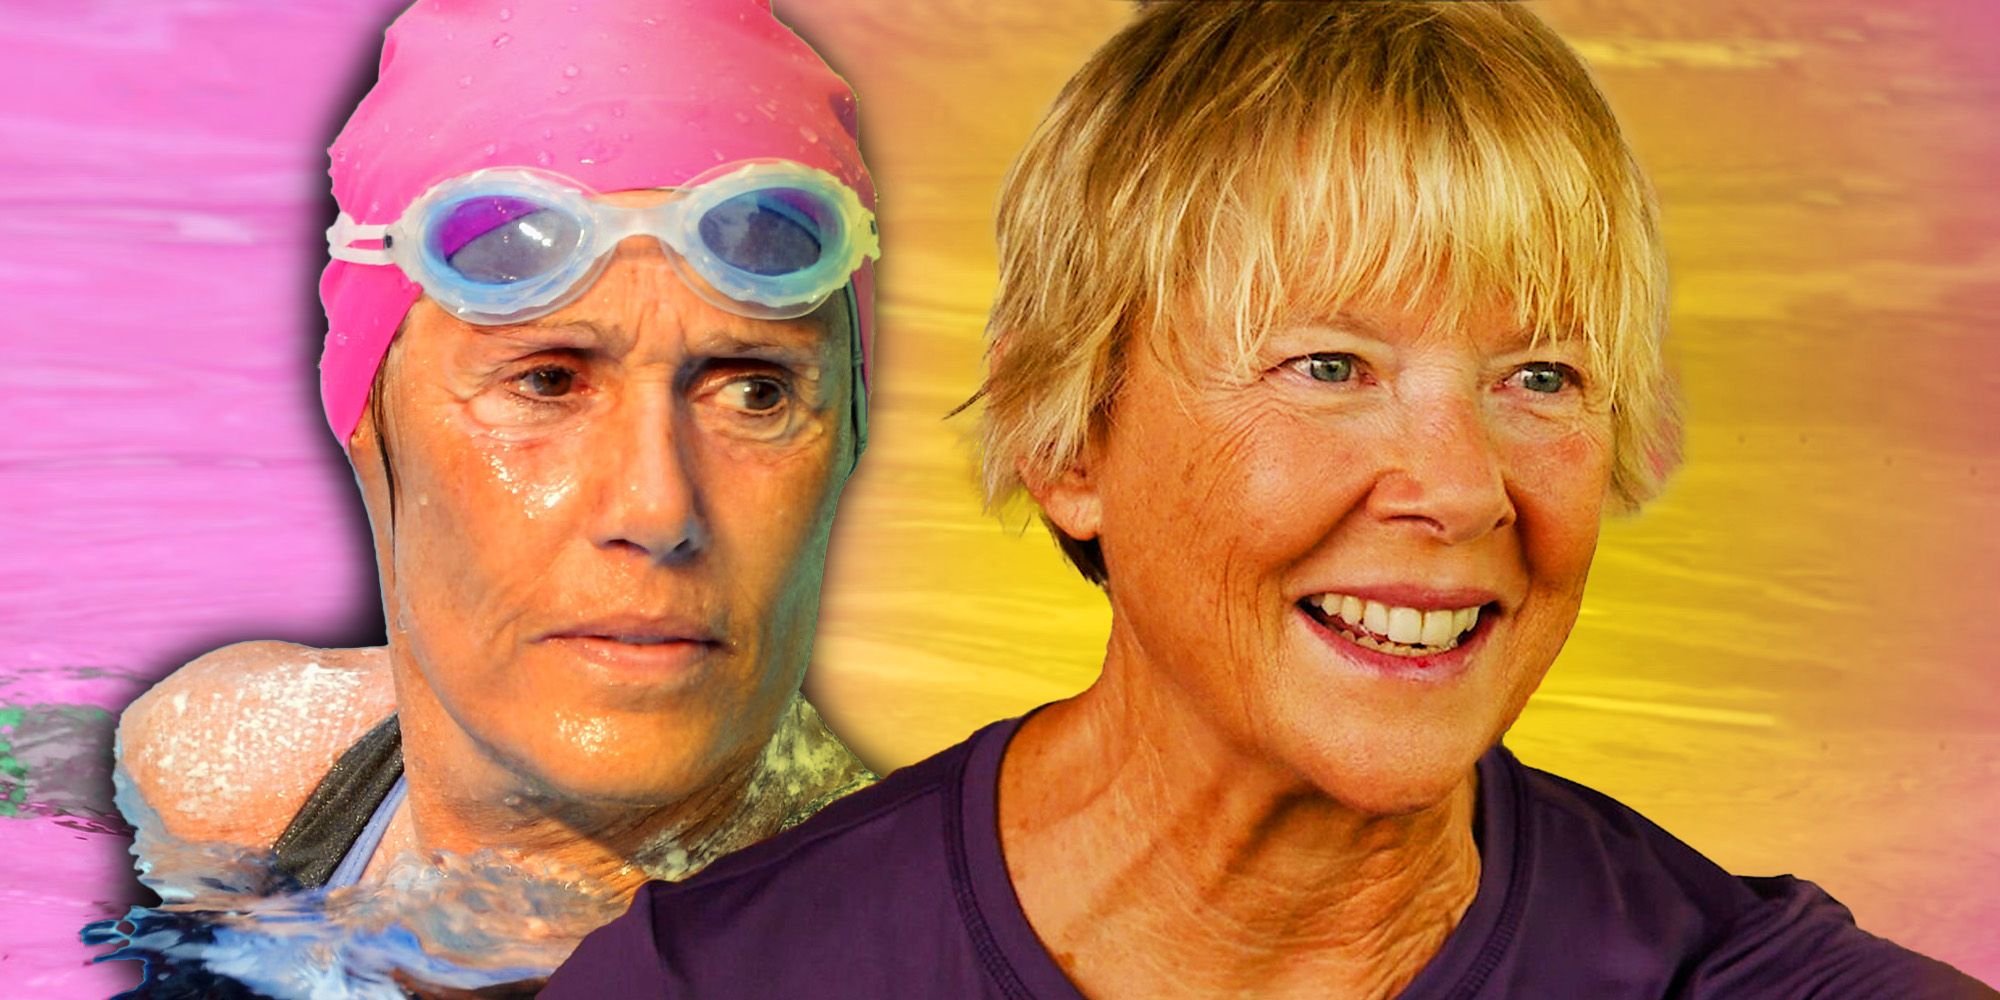 Diana Nyad swimming and Annette Bening as Diana Nyad in Nyad on Netflix.